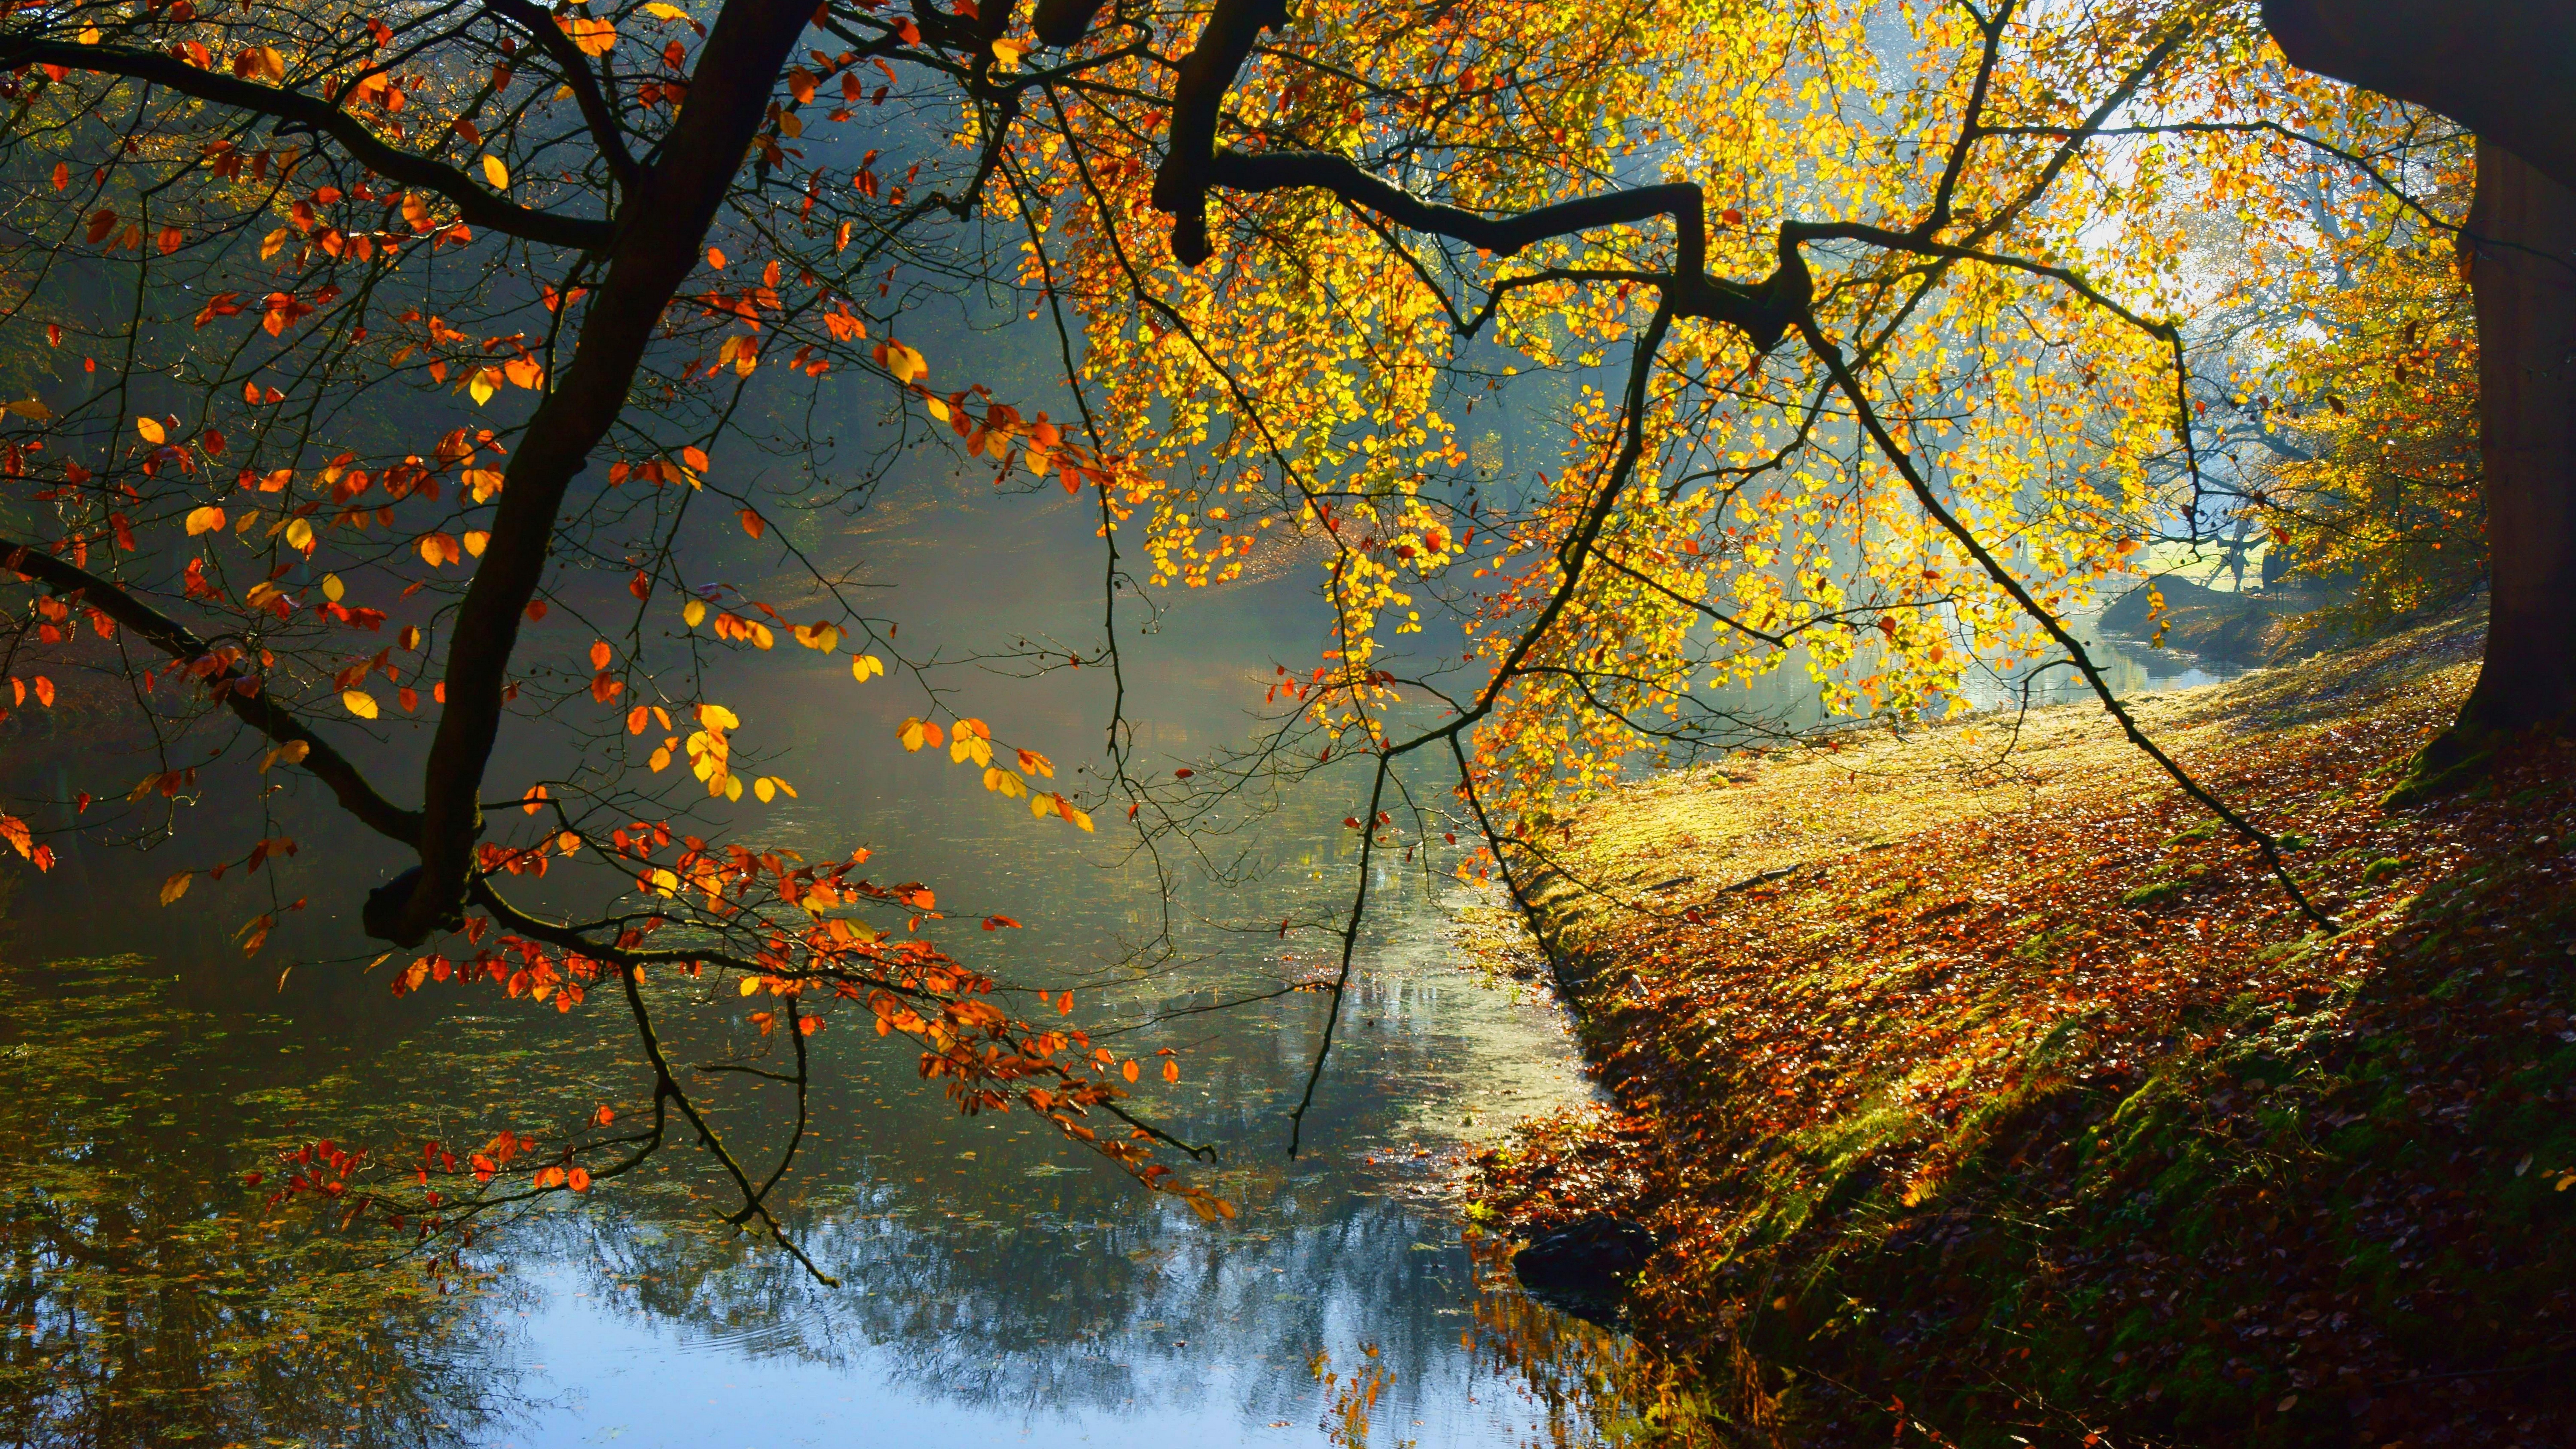 Download 8k Wallpaper Nature Inspired Wide - 8k Autumn On ...